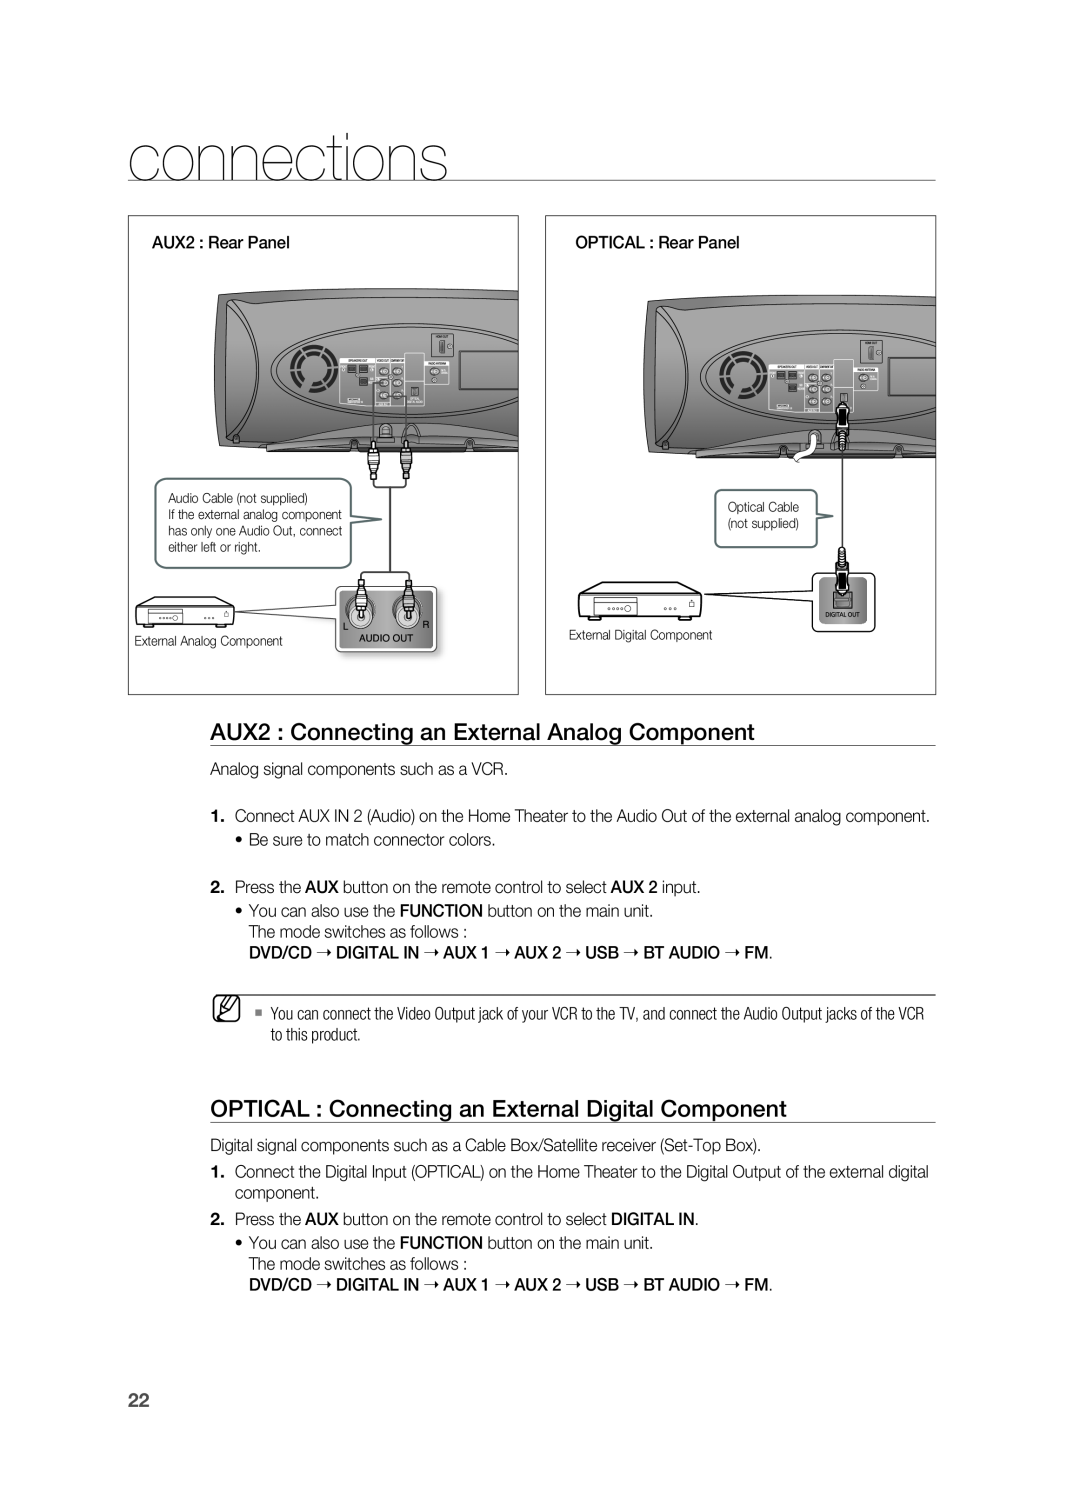 Samsung HT-A100 user manual AUX2 Connecting an External Analog Component, connections 